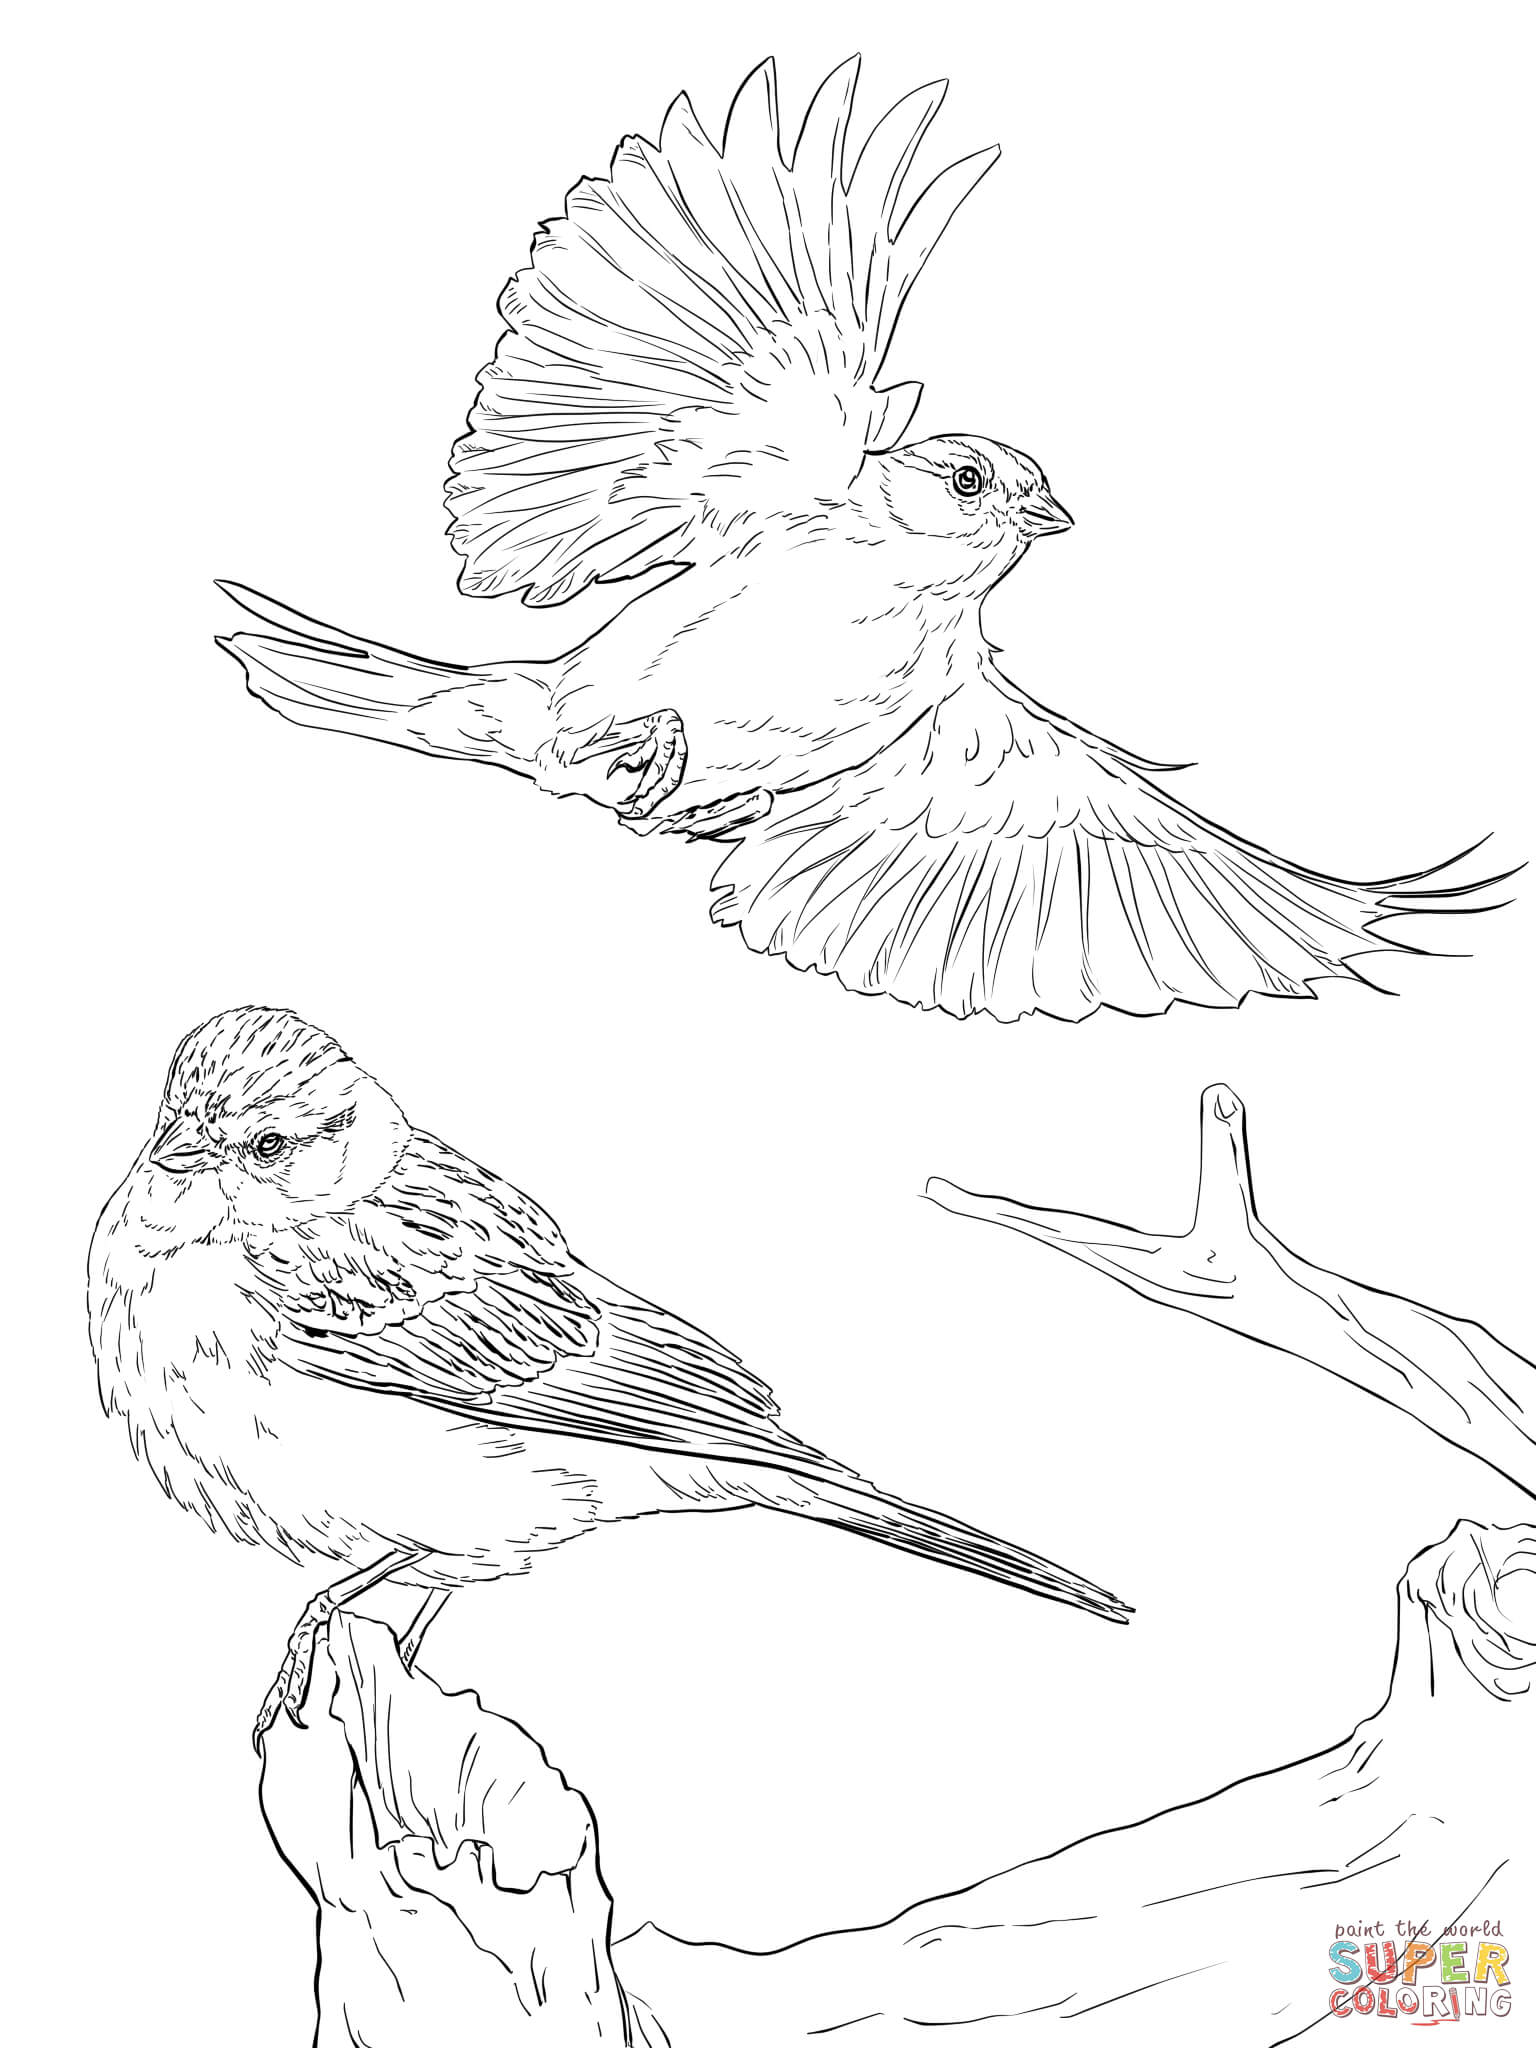 Two Chipping Sparrows coloring page | Free Printable Coloring Pages